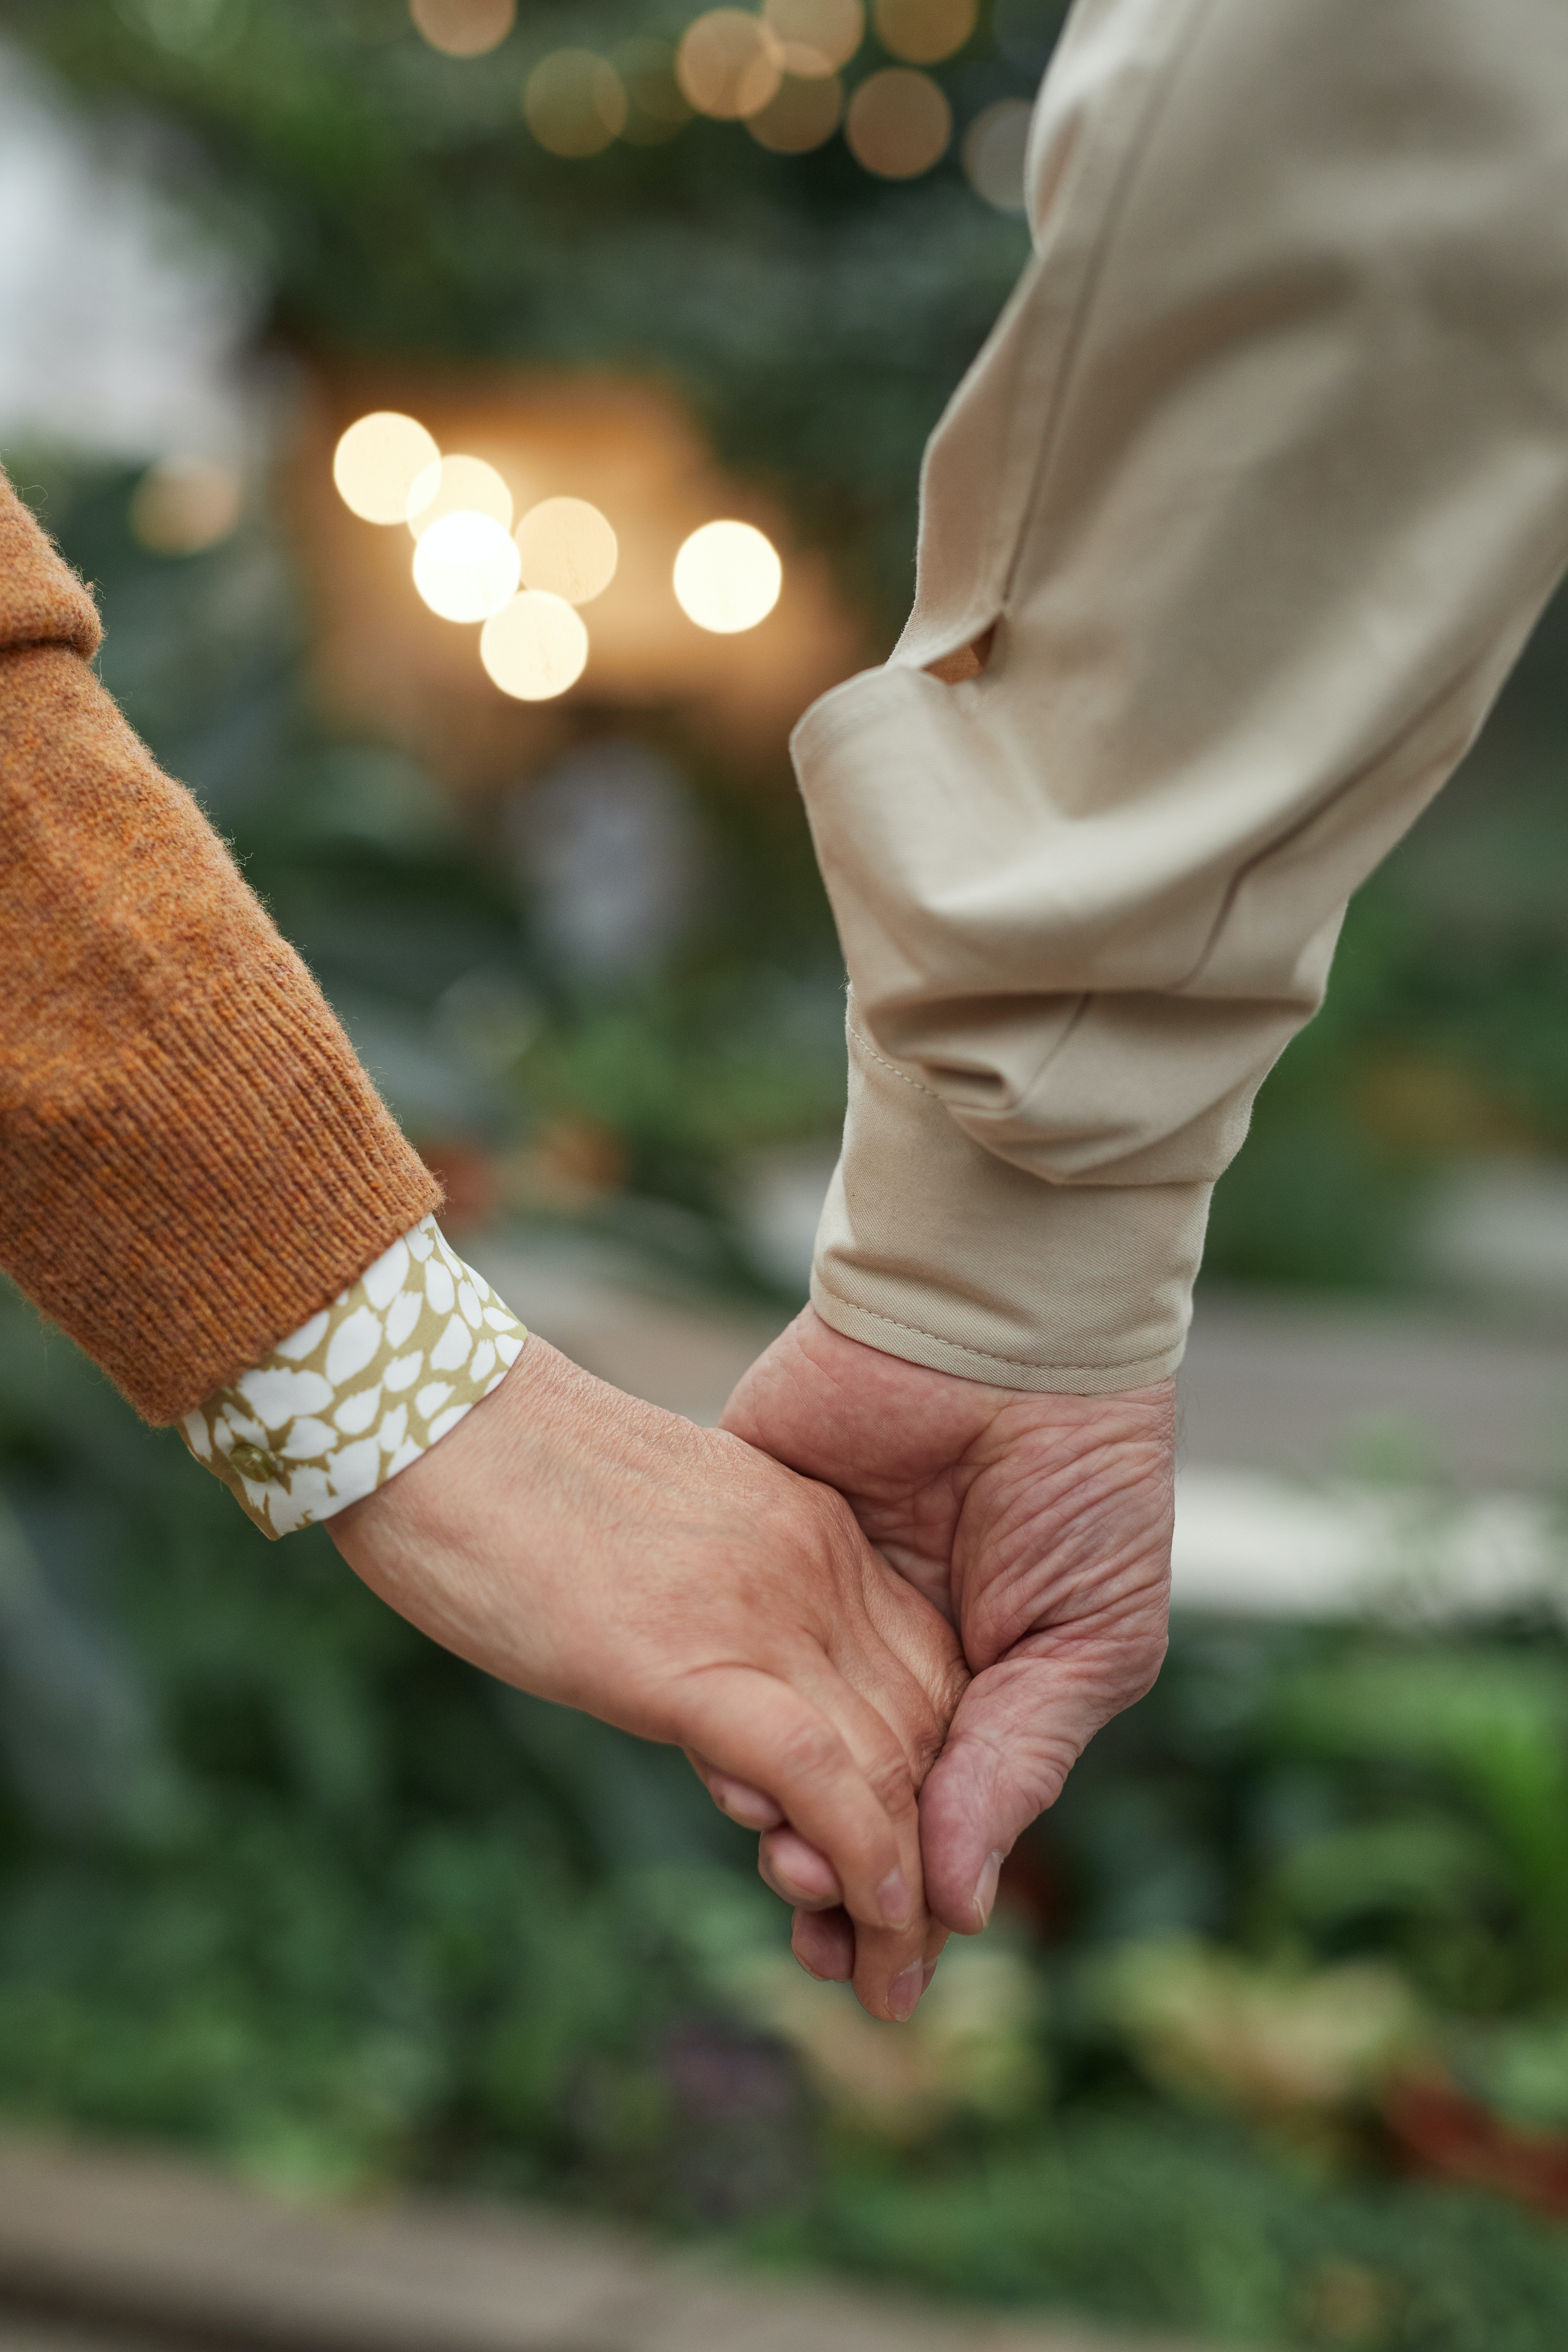 Two individuals holding hands. | Source: Pexels